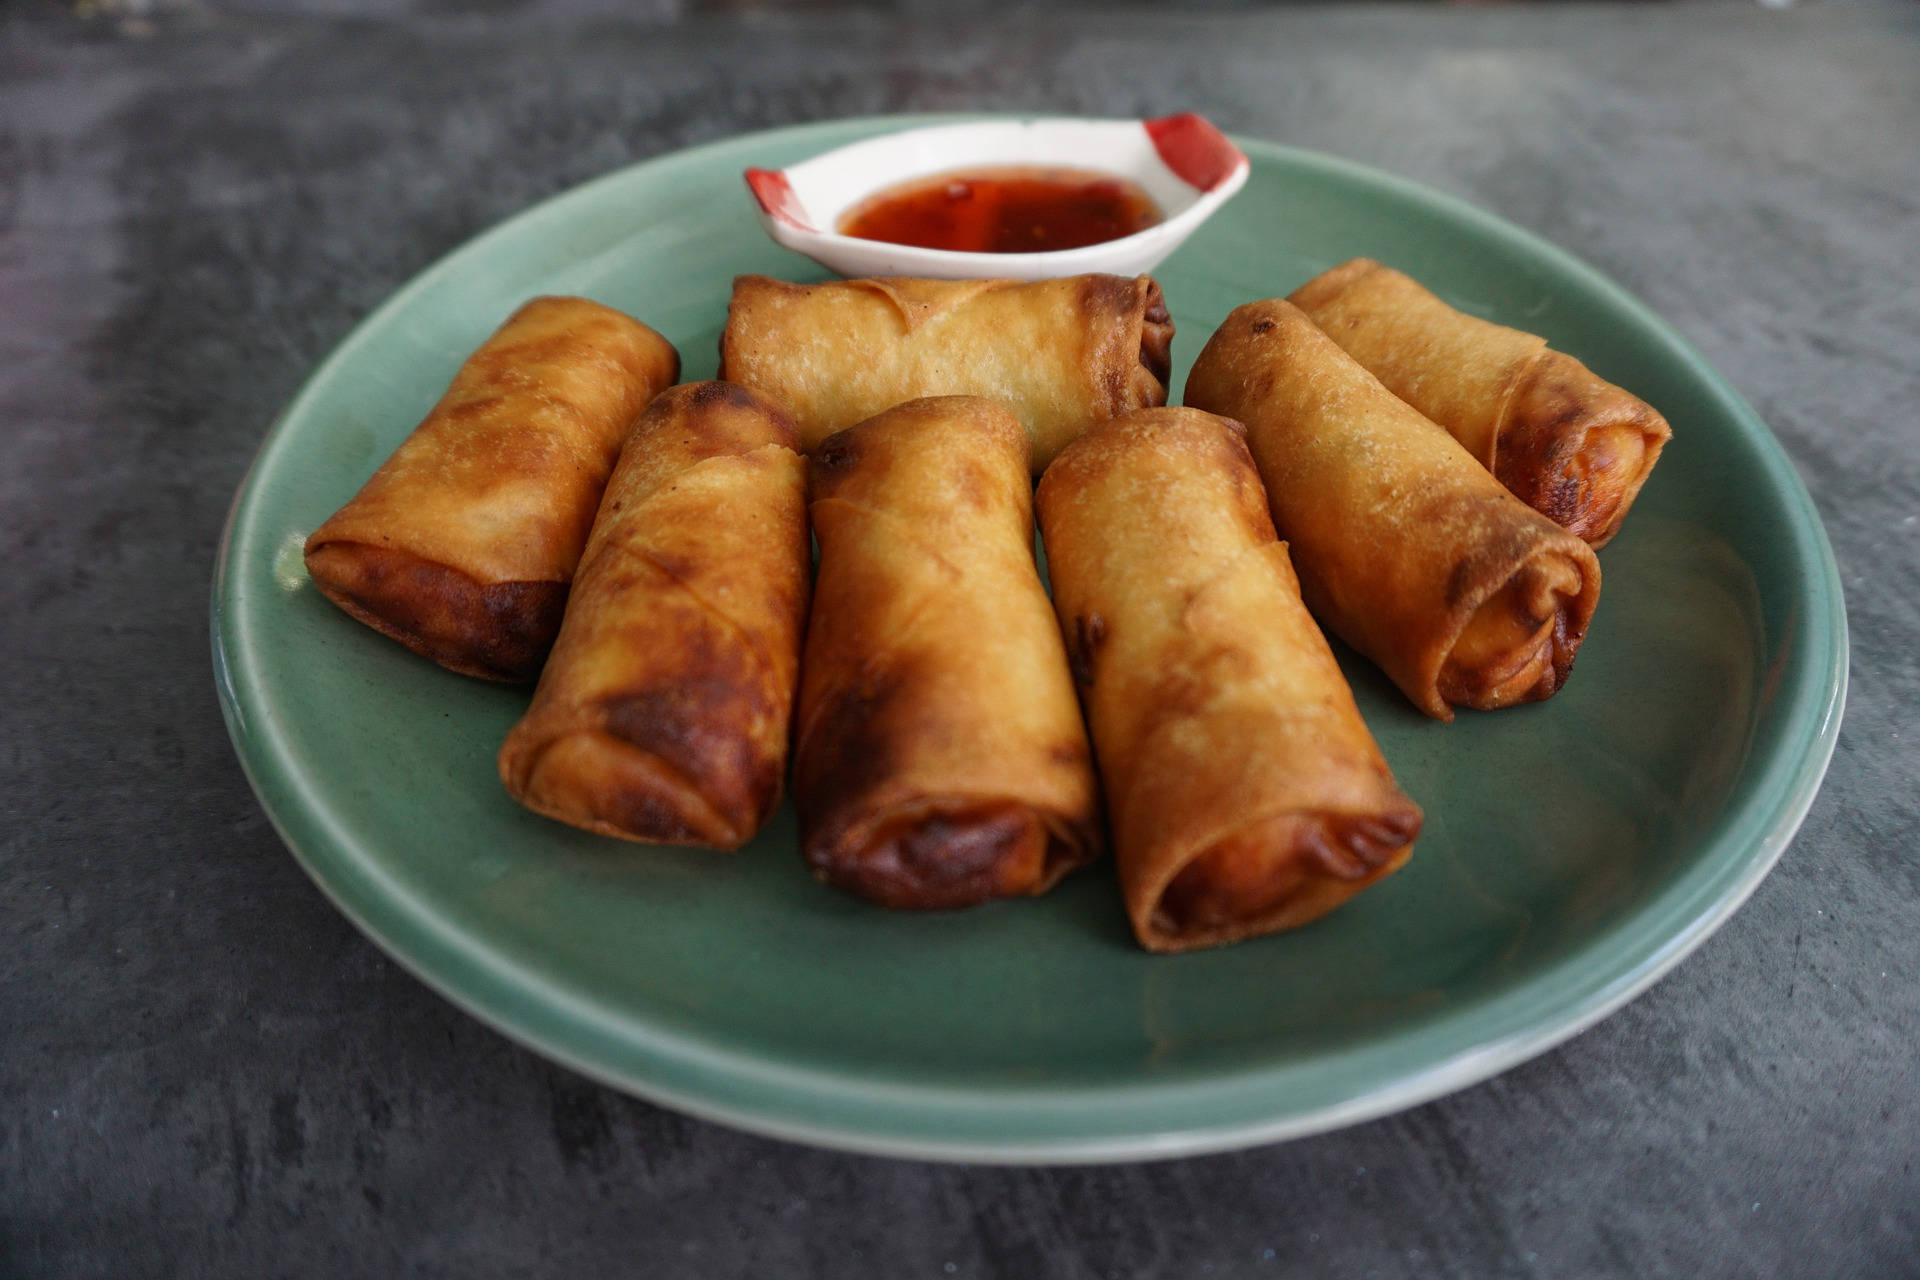 Caption: Deliciously Crisp Egg Rolls On A Simple Plate Background